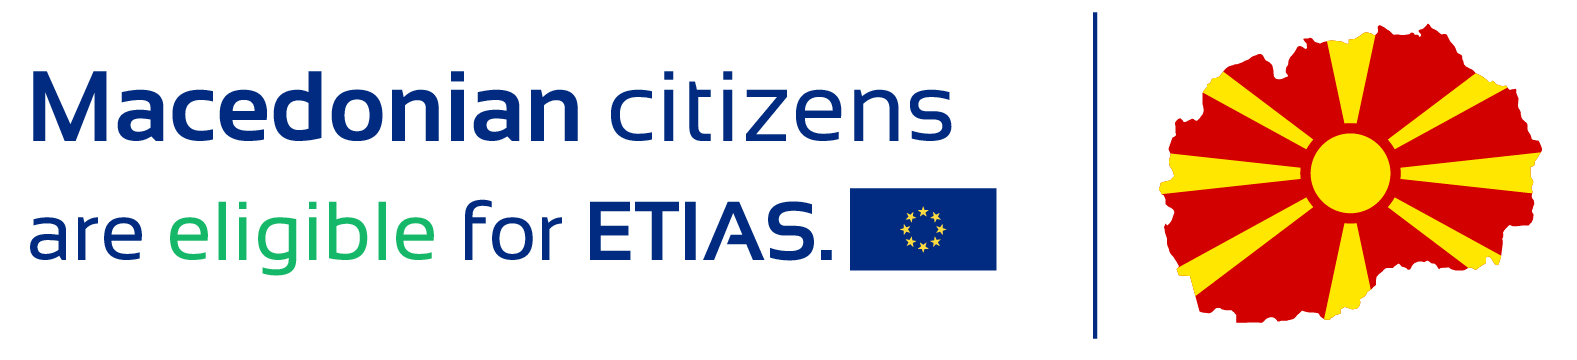 Macedonian citizens are eligible for ETIAS